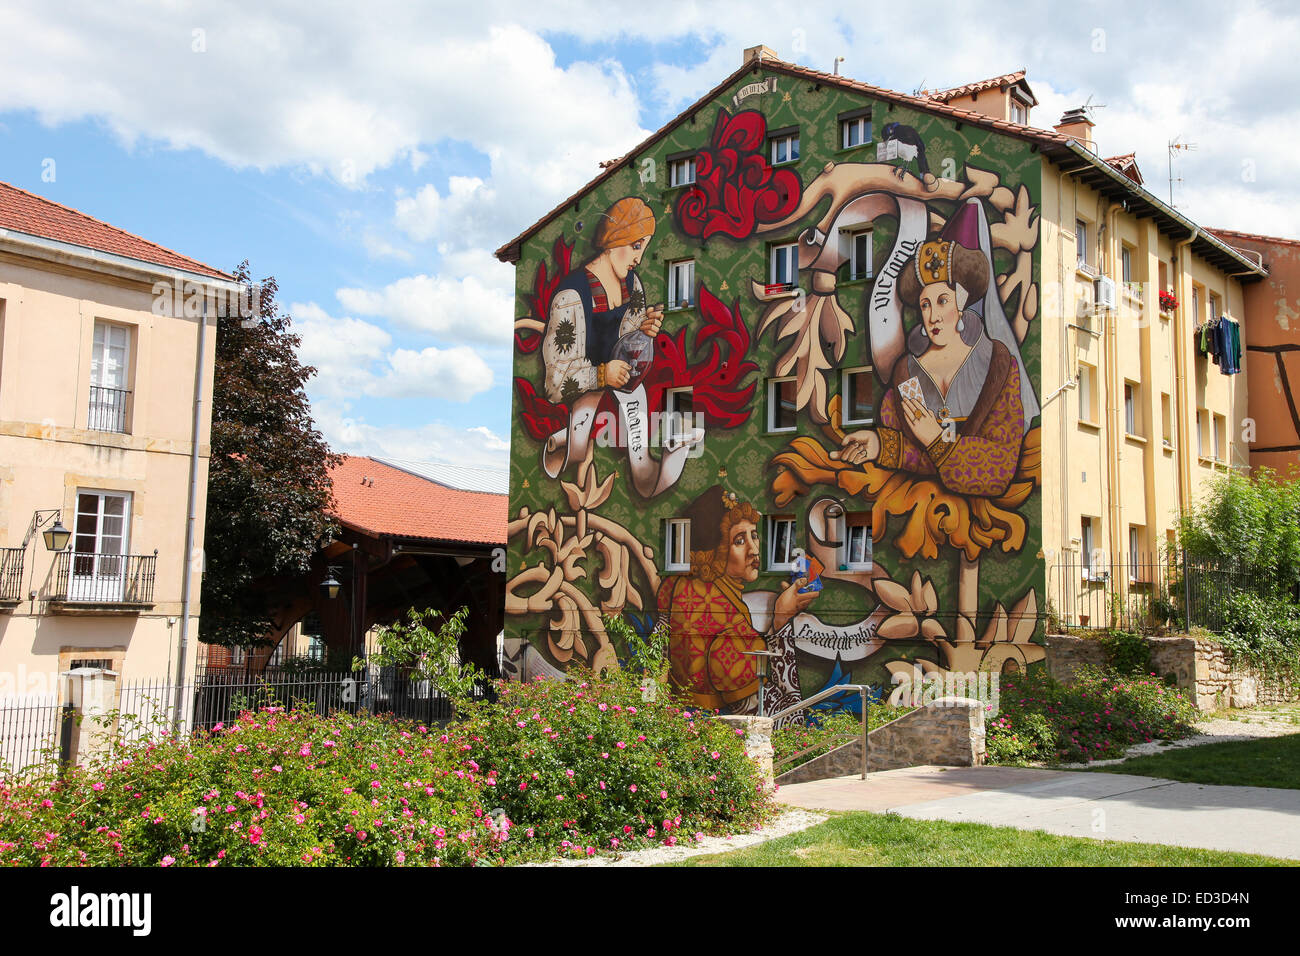 HONDARRIBIA, SPAIN - MAY 27, 2014: Mural painting created by an unidentified artist in Hondarribia, a town in Gipuzkoa, Basque C Stock Photo